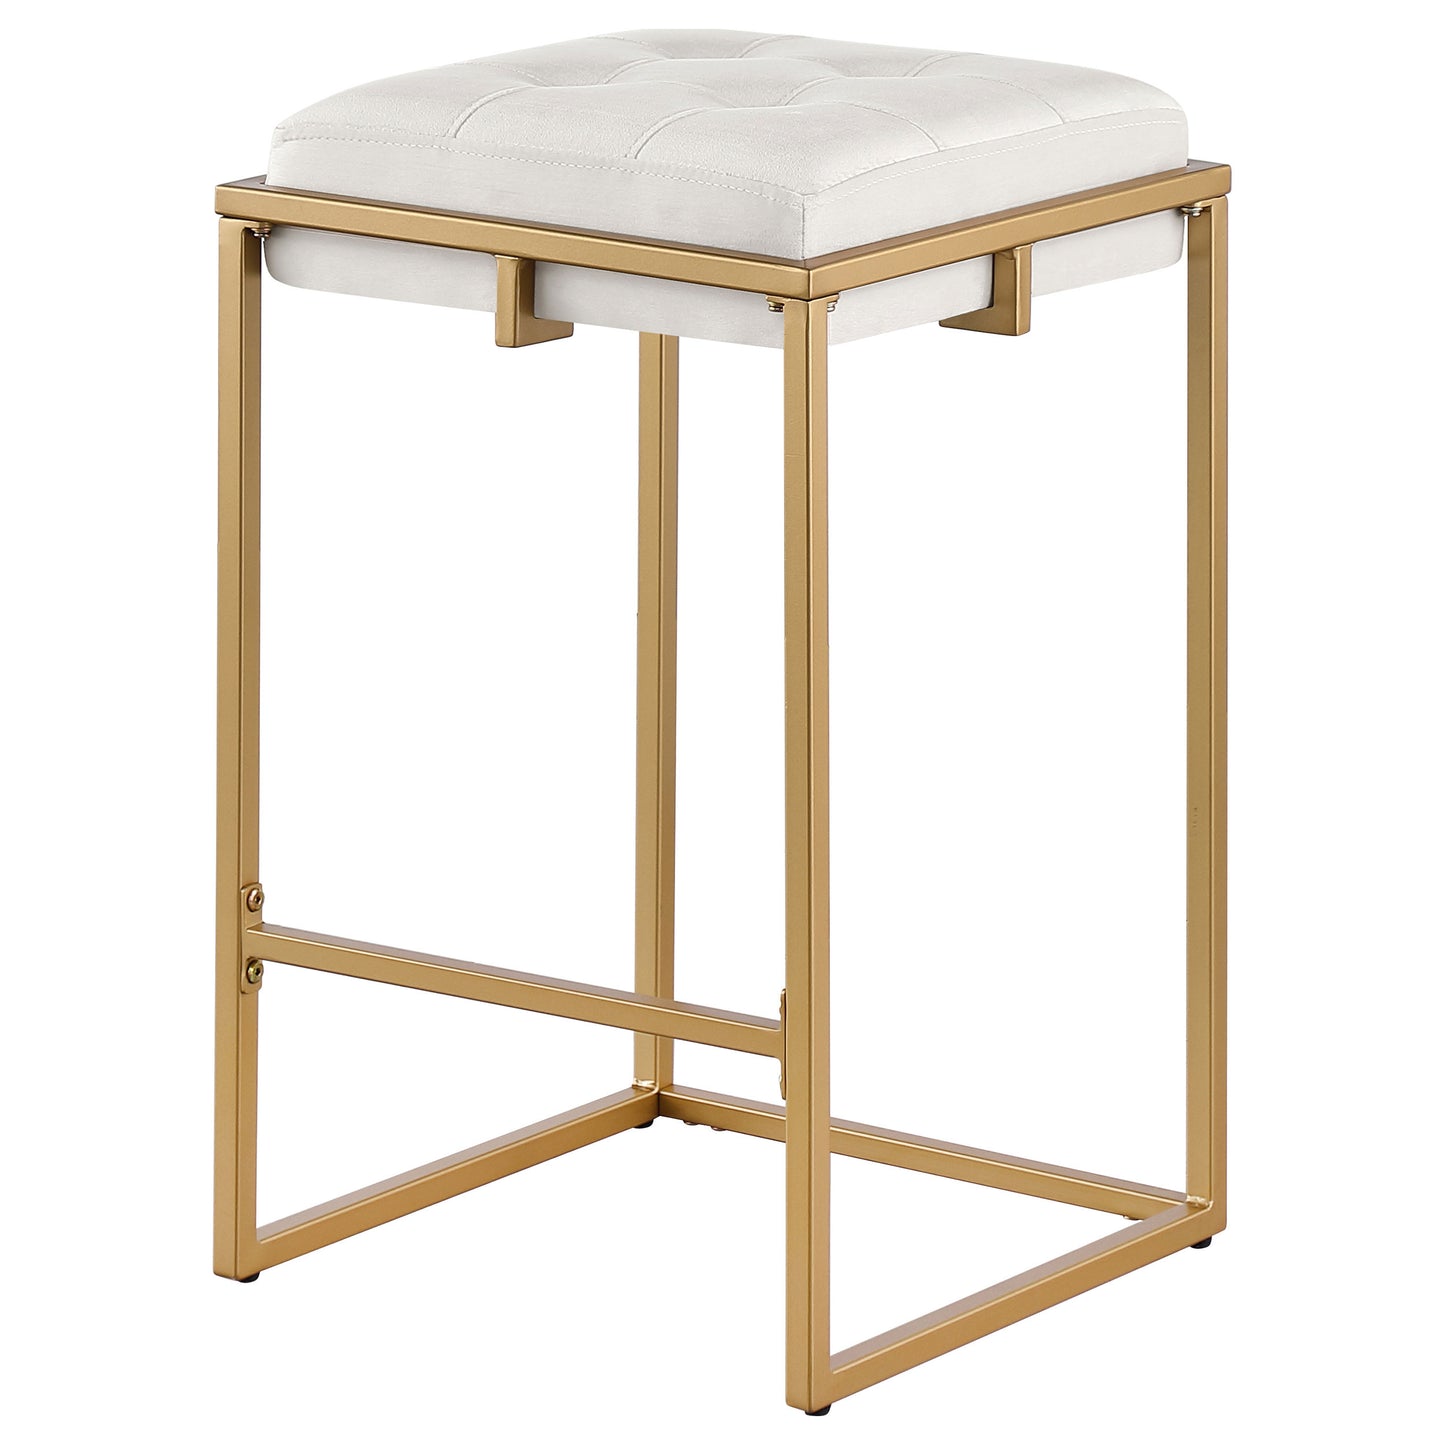 Nadia Square Padded Seat Counter Height Stool (Set of 2) Beige and Gold